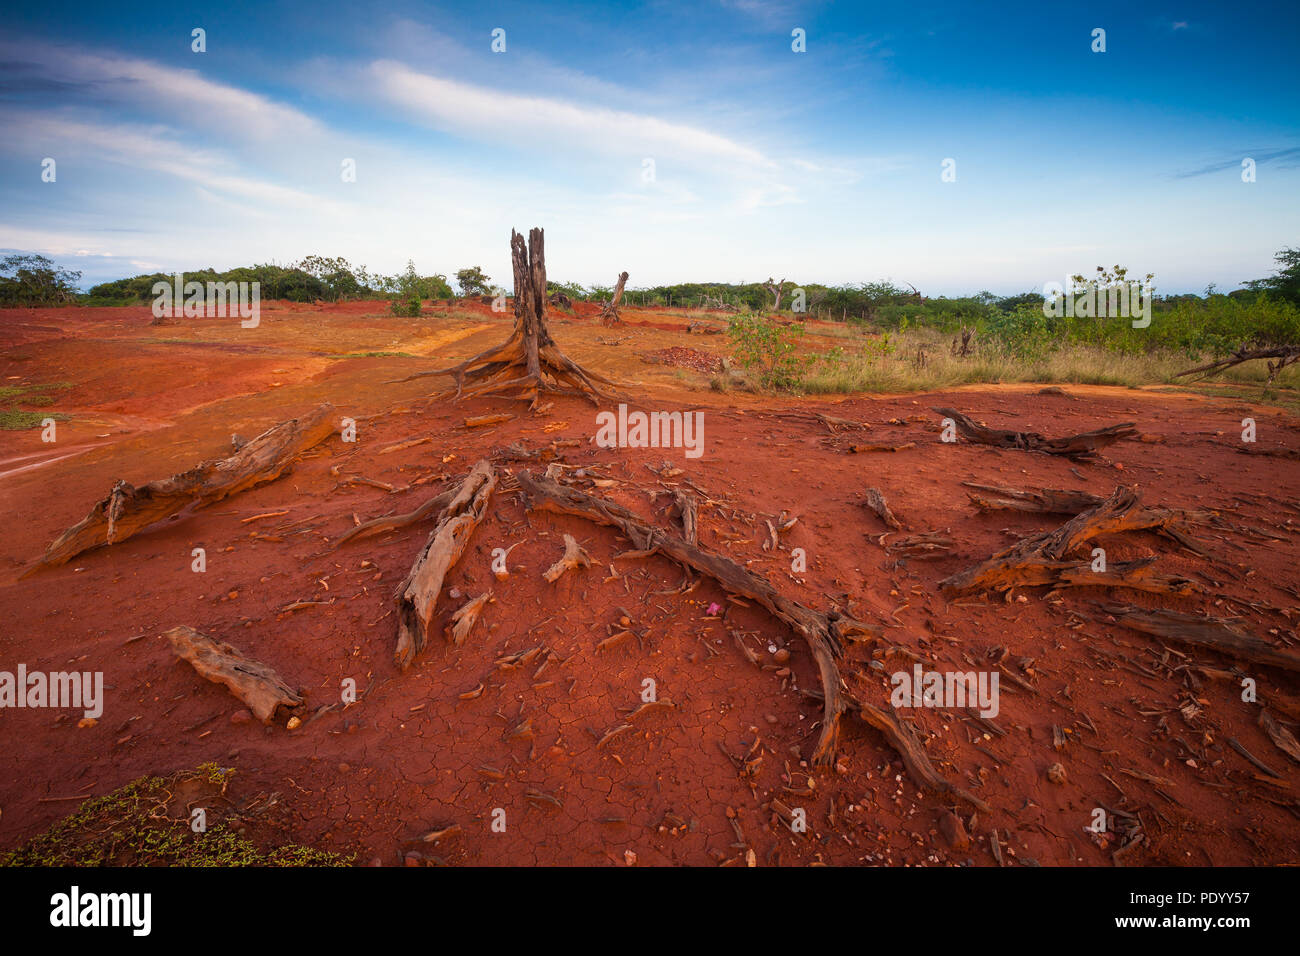 Panama landscape with dry wood and red soil in Sarigua national park, Herrera province, Republic of Panama, Central America. Stock Photo